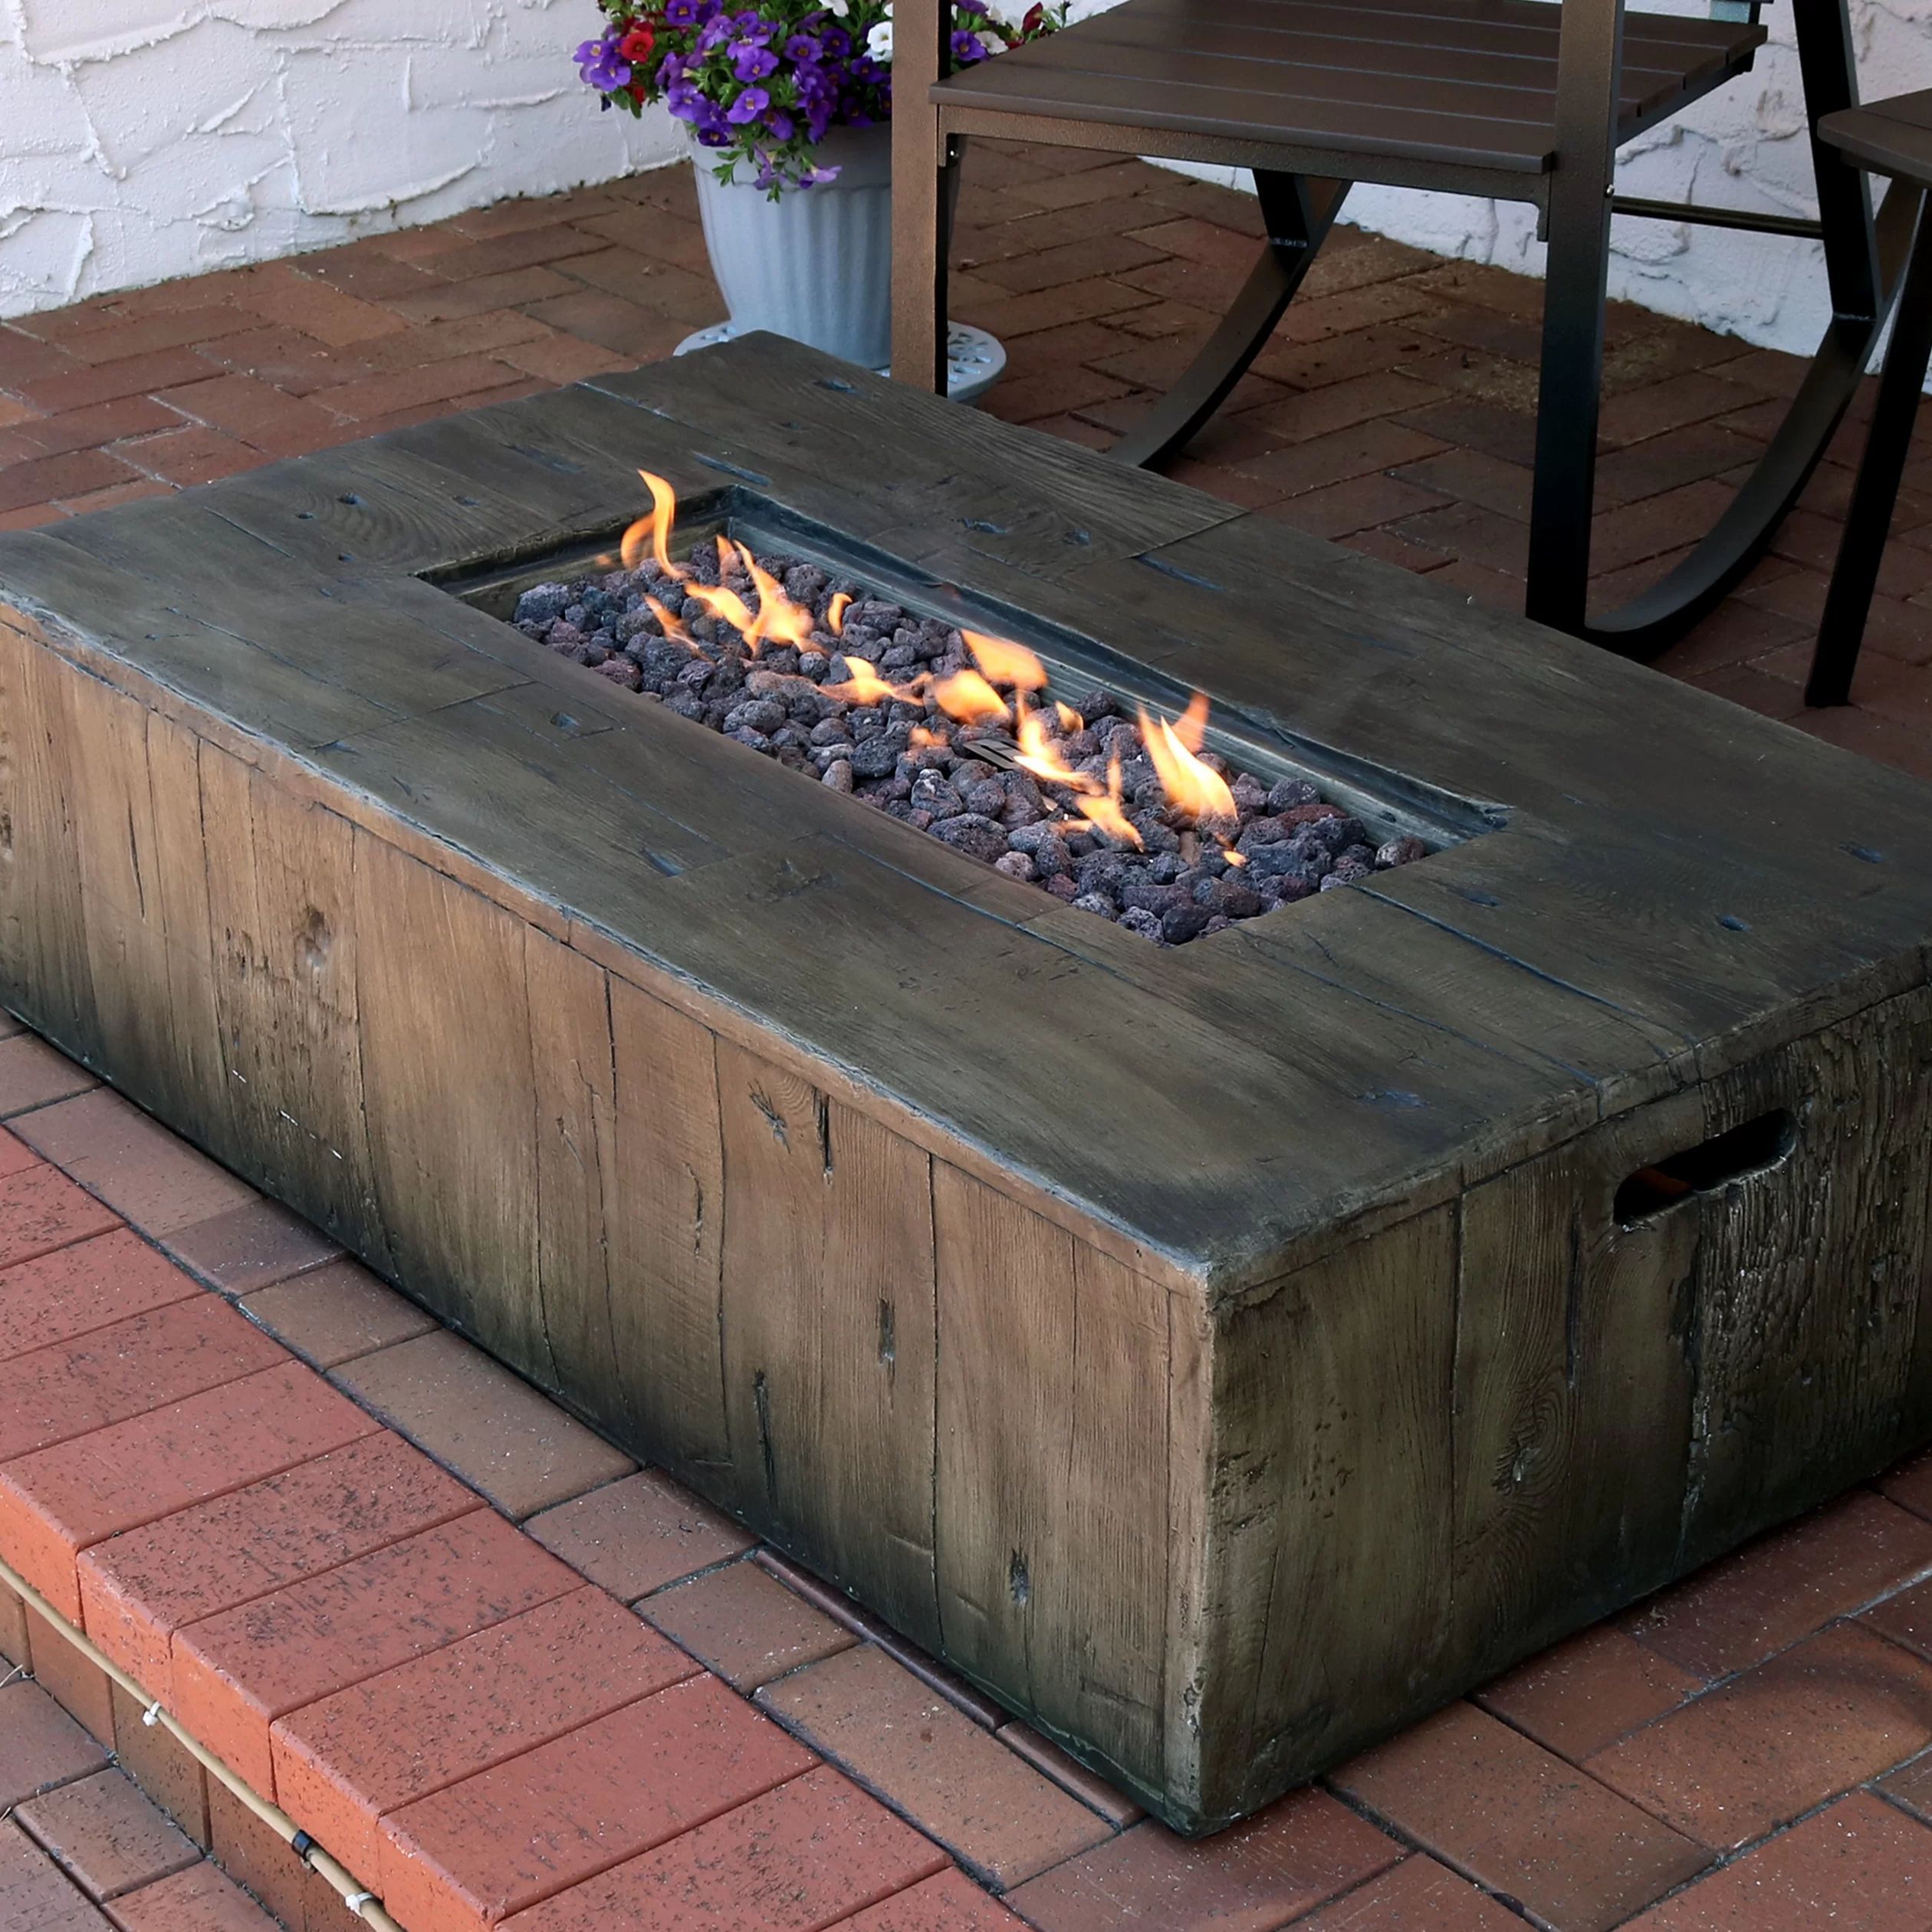 Propane Tabletop Fireplace Best Of 10 the Best Unique Garden Ideas with Pallets to Create